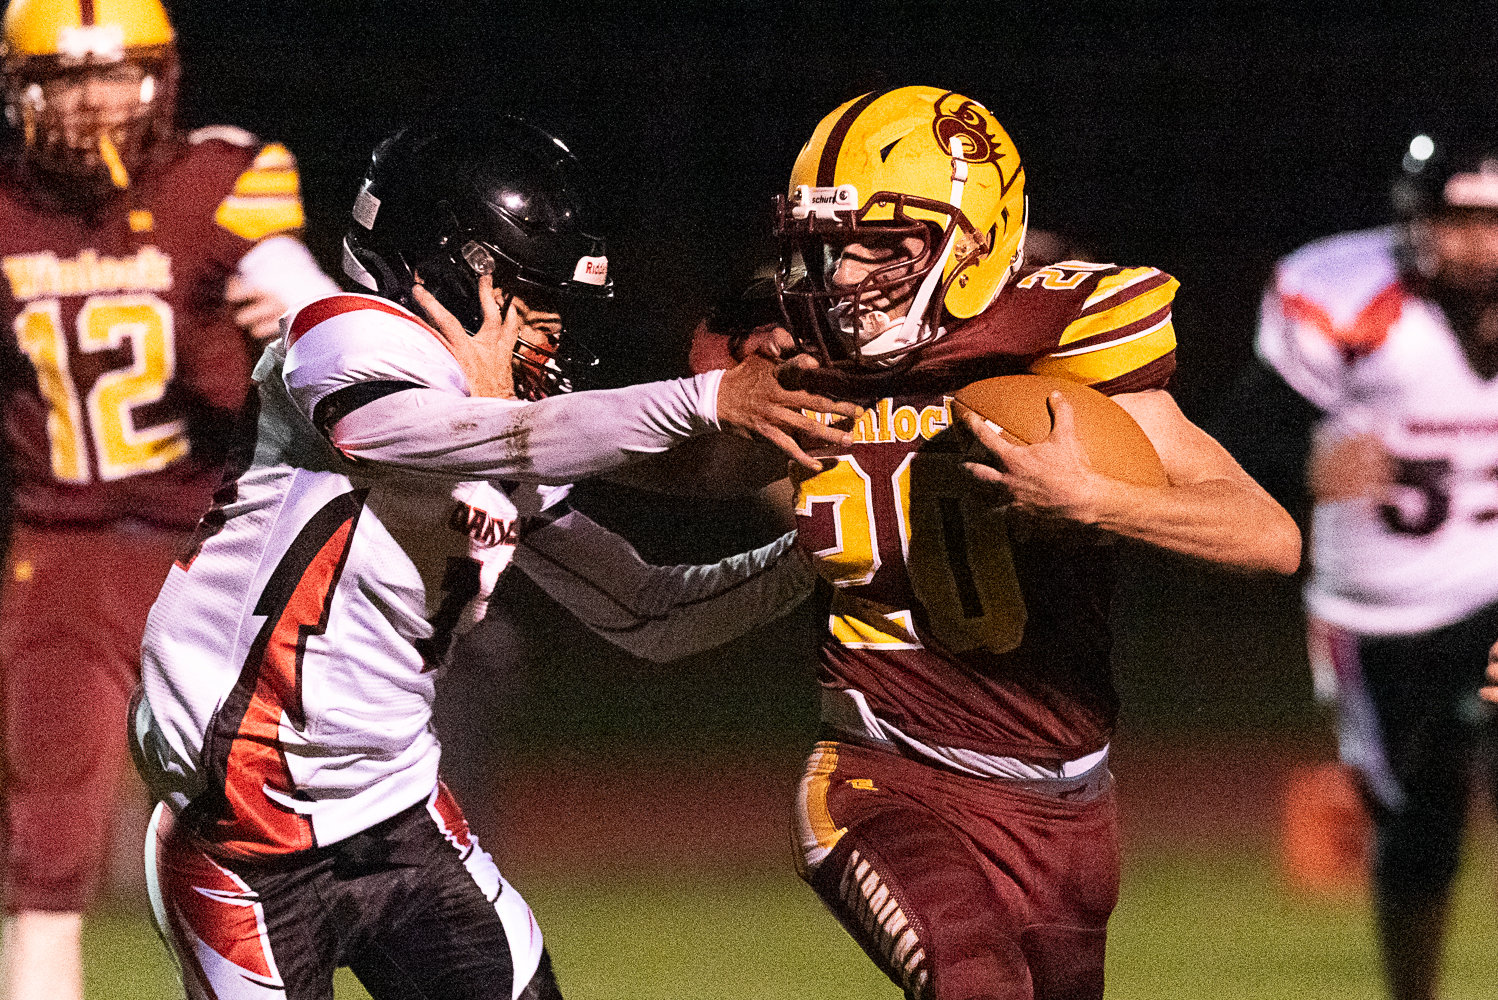 Winlock's Kaiden Perkins stiff-arms a defender during the Cardinals' 36-28 win over Oakville on Oct. 7.